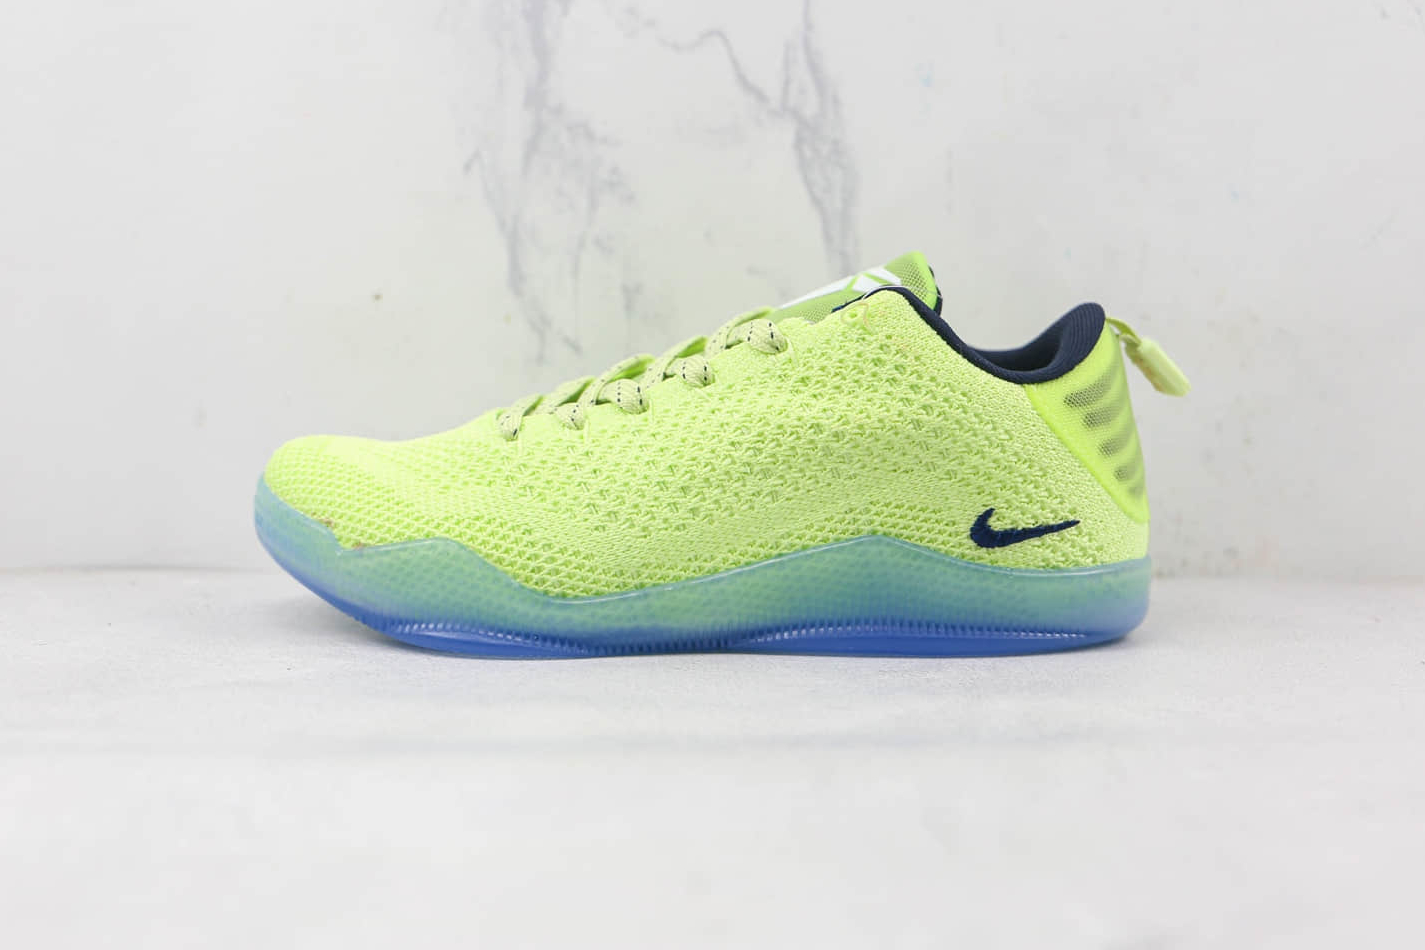 Nike Kobe 11 Elite Low 4KB Ghost of Christmas Past 824463-334 - Lightweight and stylish basketball shoes | Shop now!